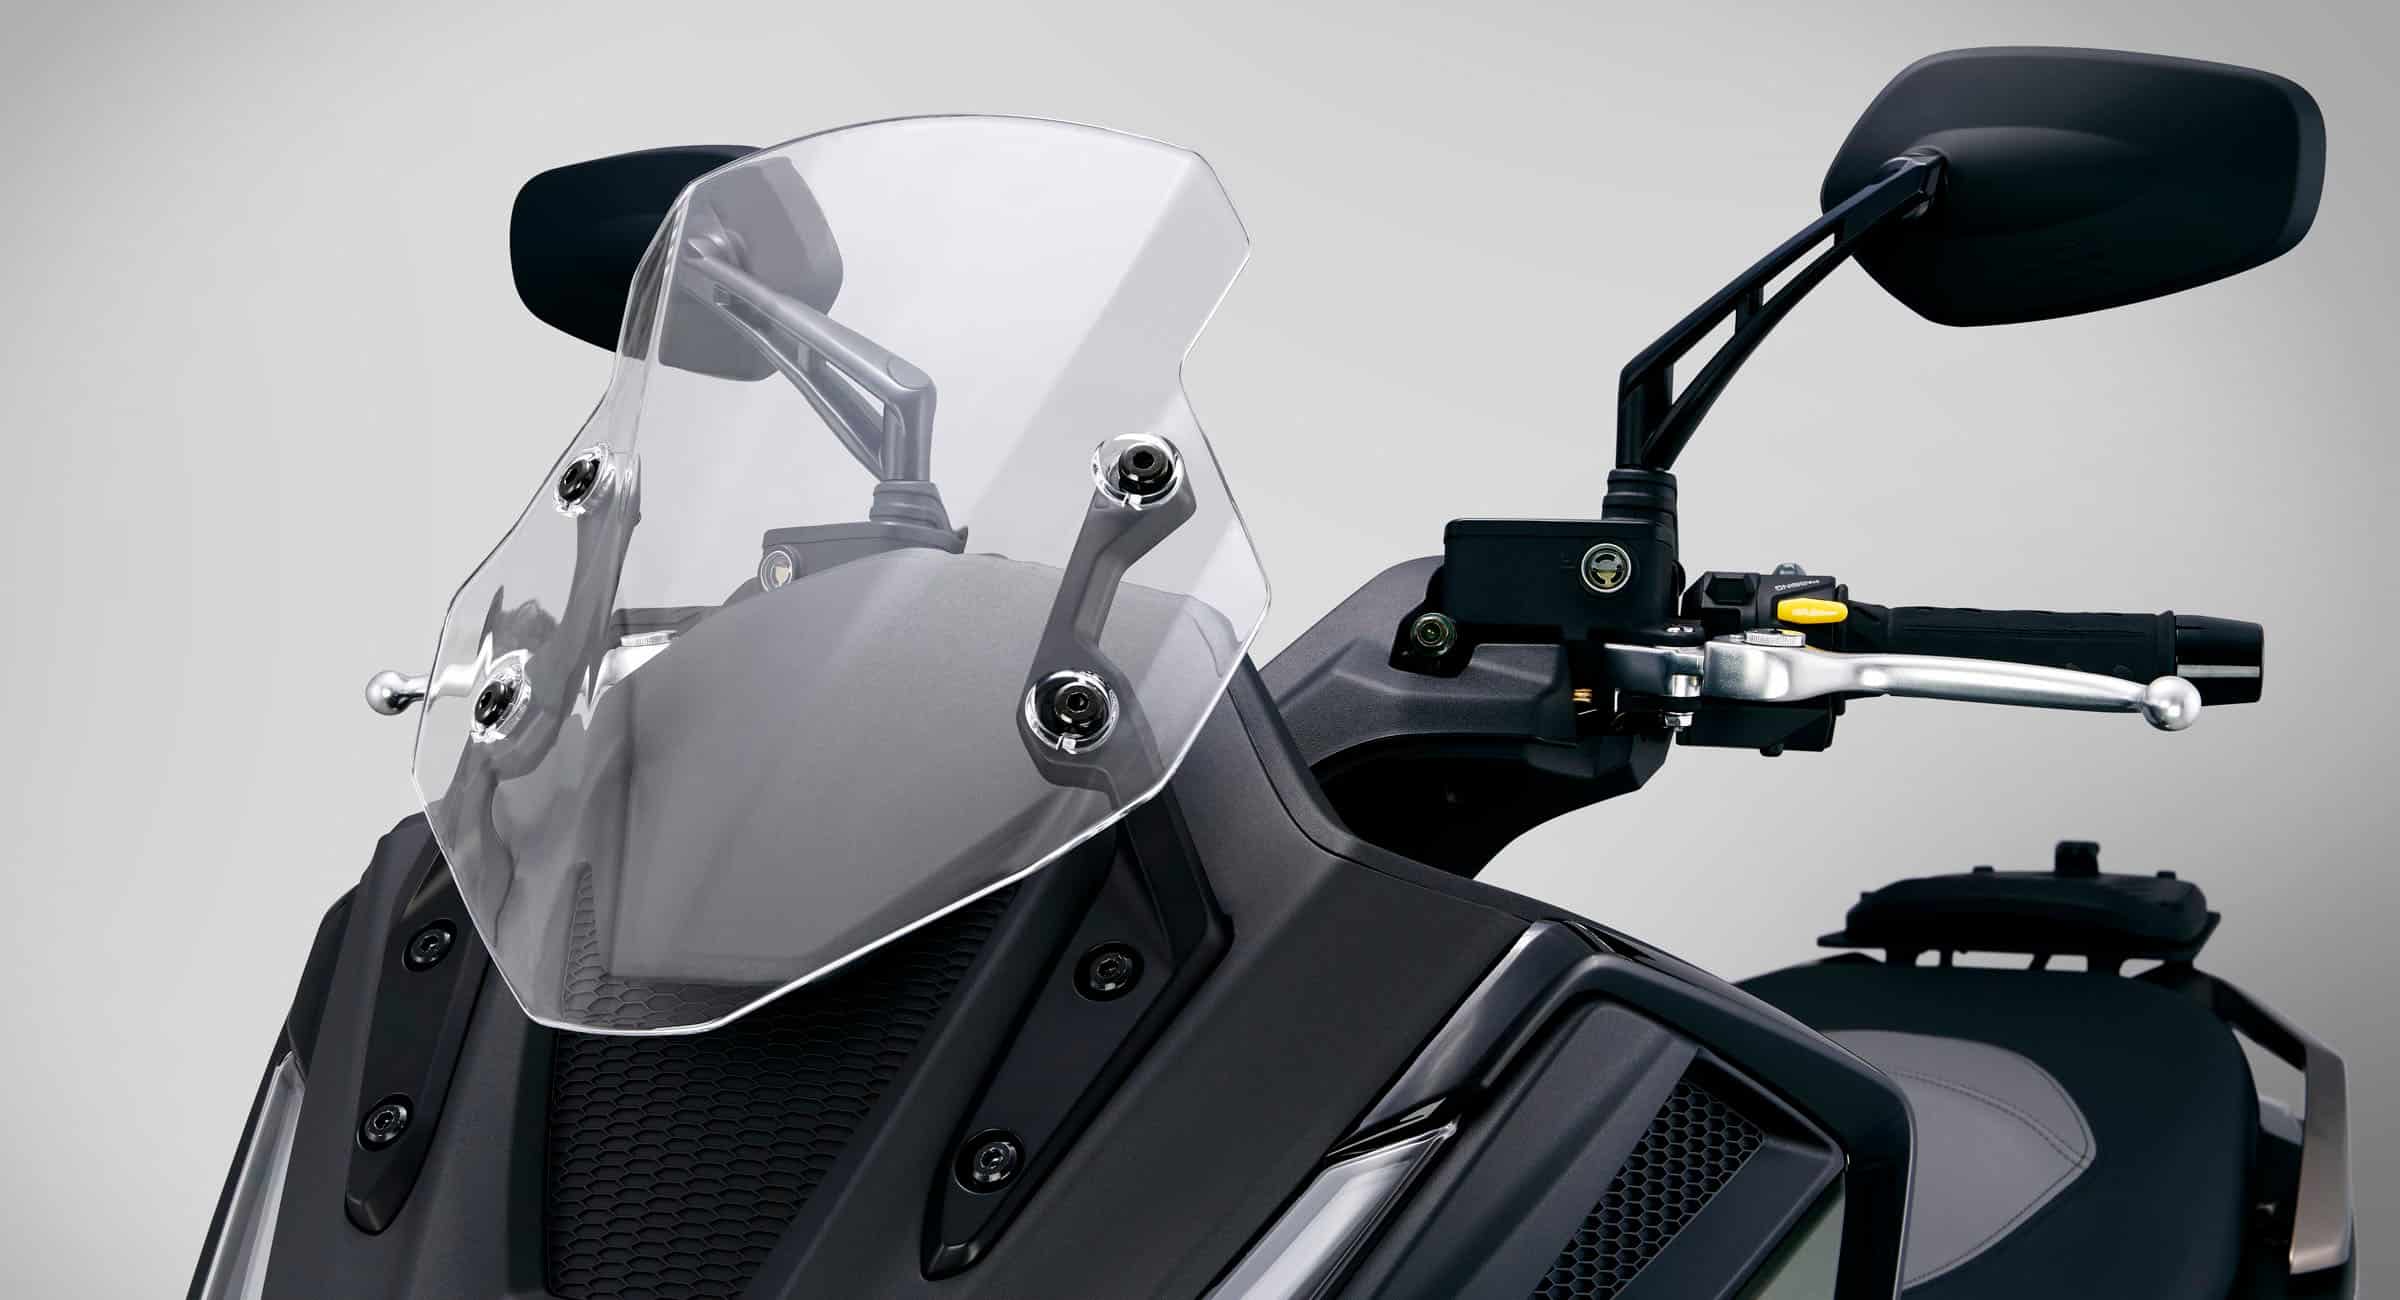 ddbikes_kymco_dtx125-2